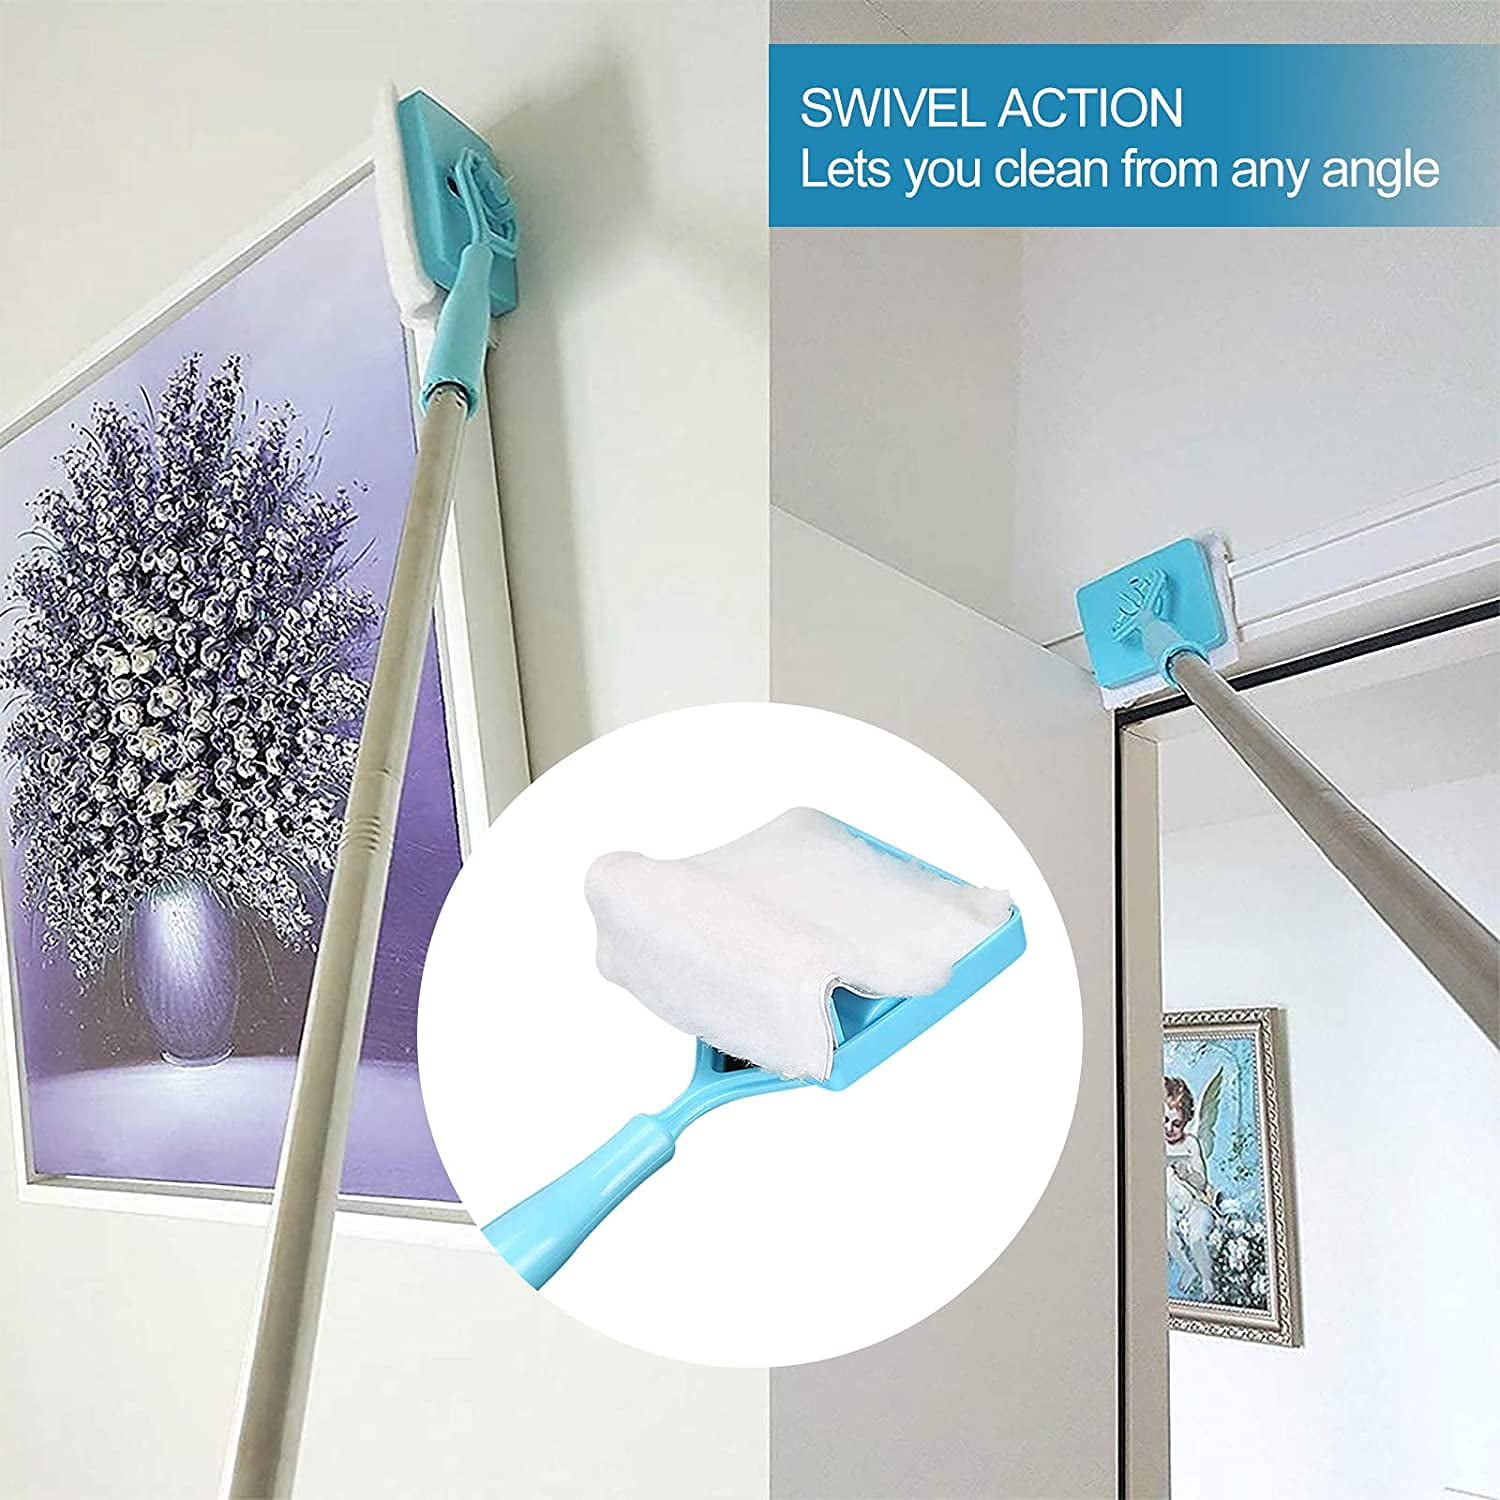 Baseboard Cleaner Tool with Handle, Wall Cleaner with Extendable Long  Handle ,Door Frame Cleaning Tool Including 4 Reusable Cleaning Pads. Quick Clean  Baseboard Cleaning, Ceiling and Wall. - Yahoo Shopping